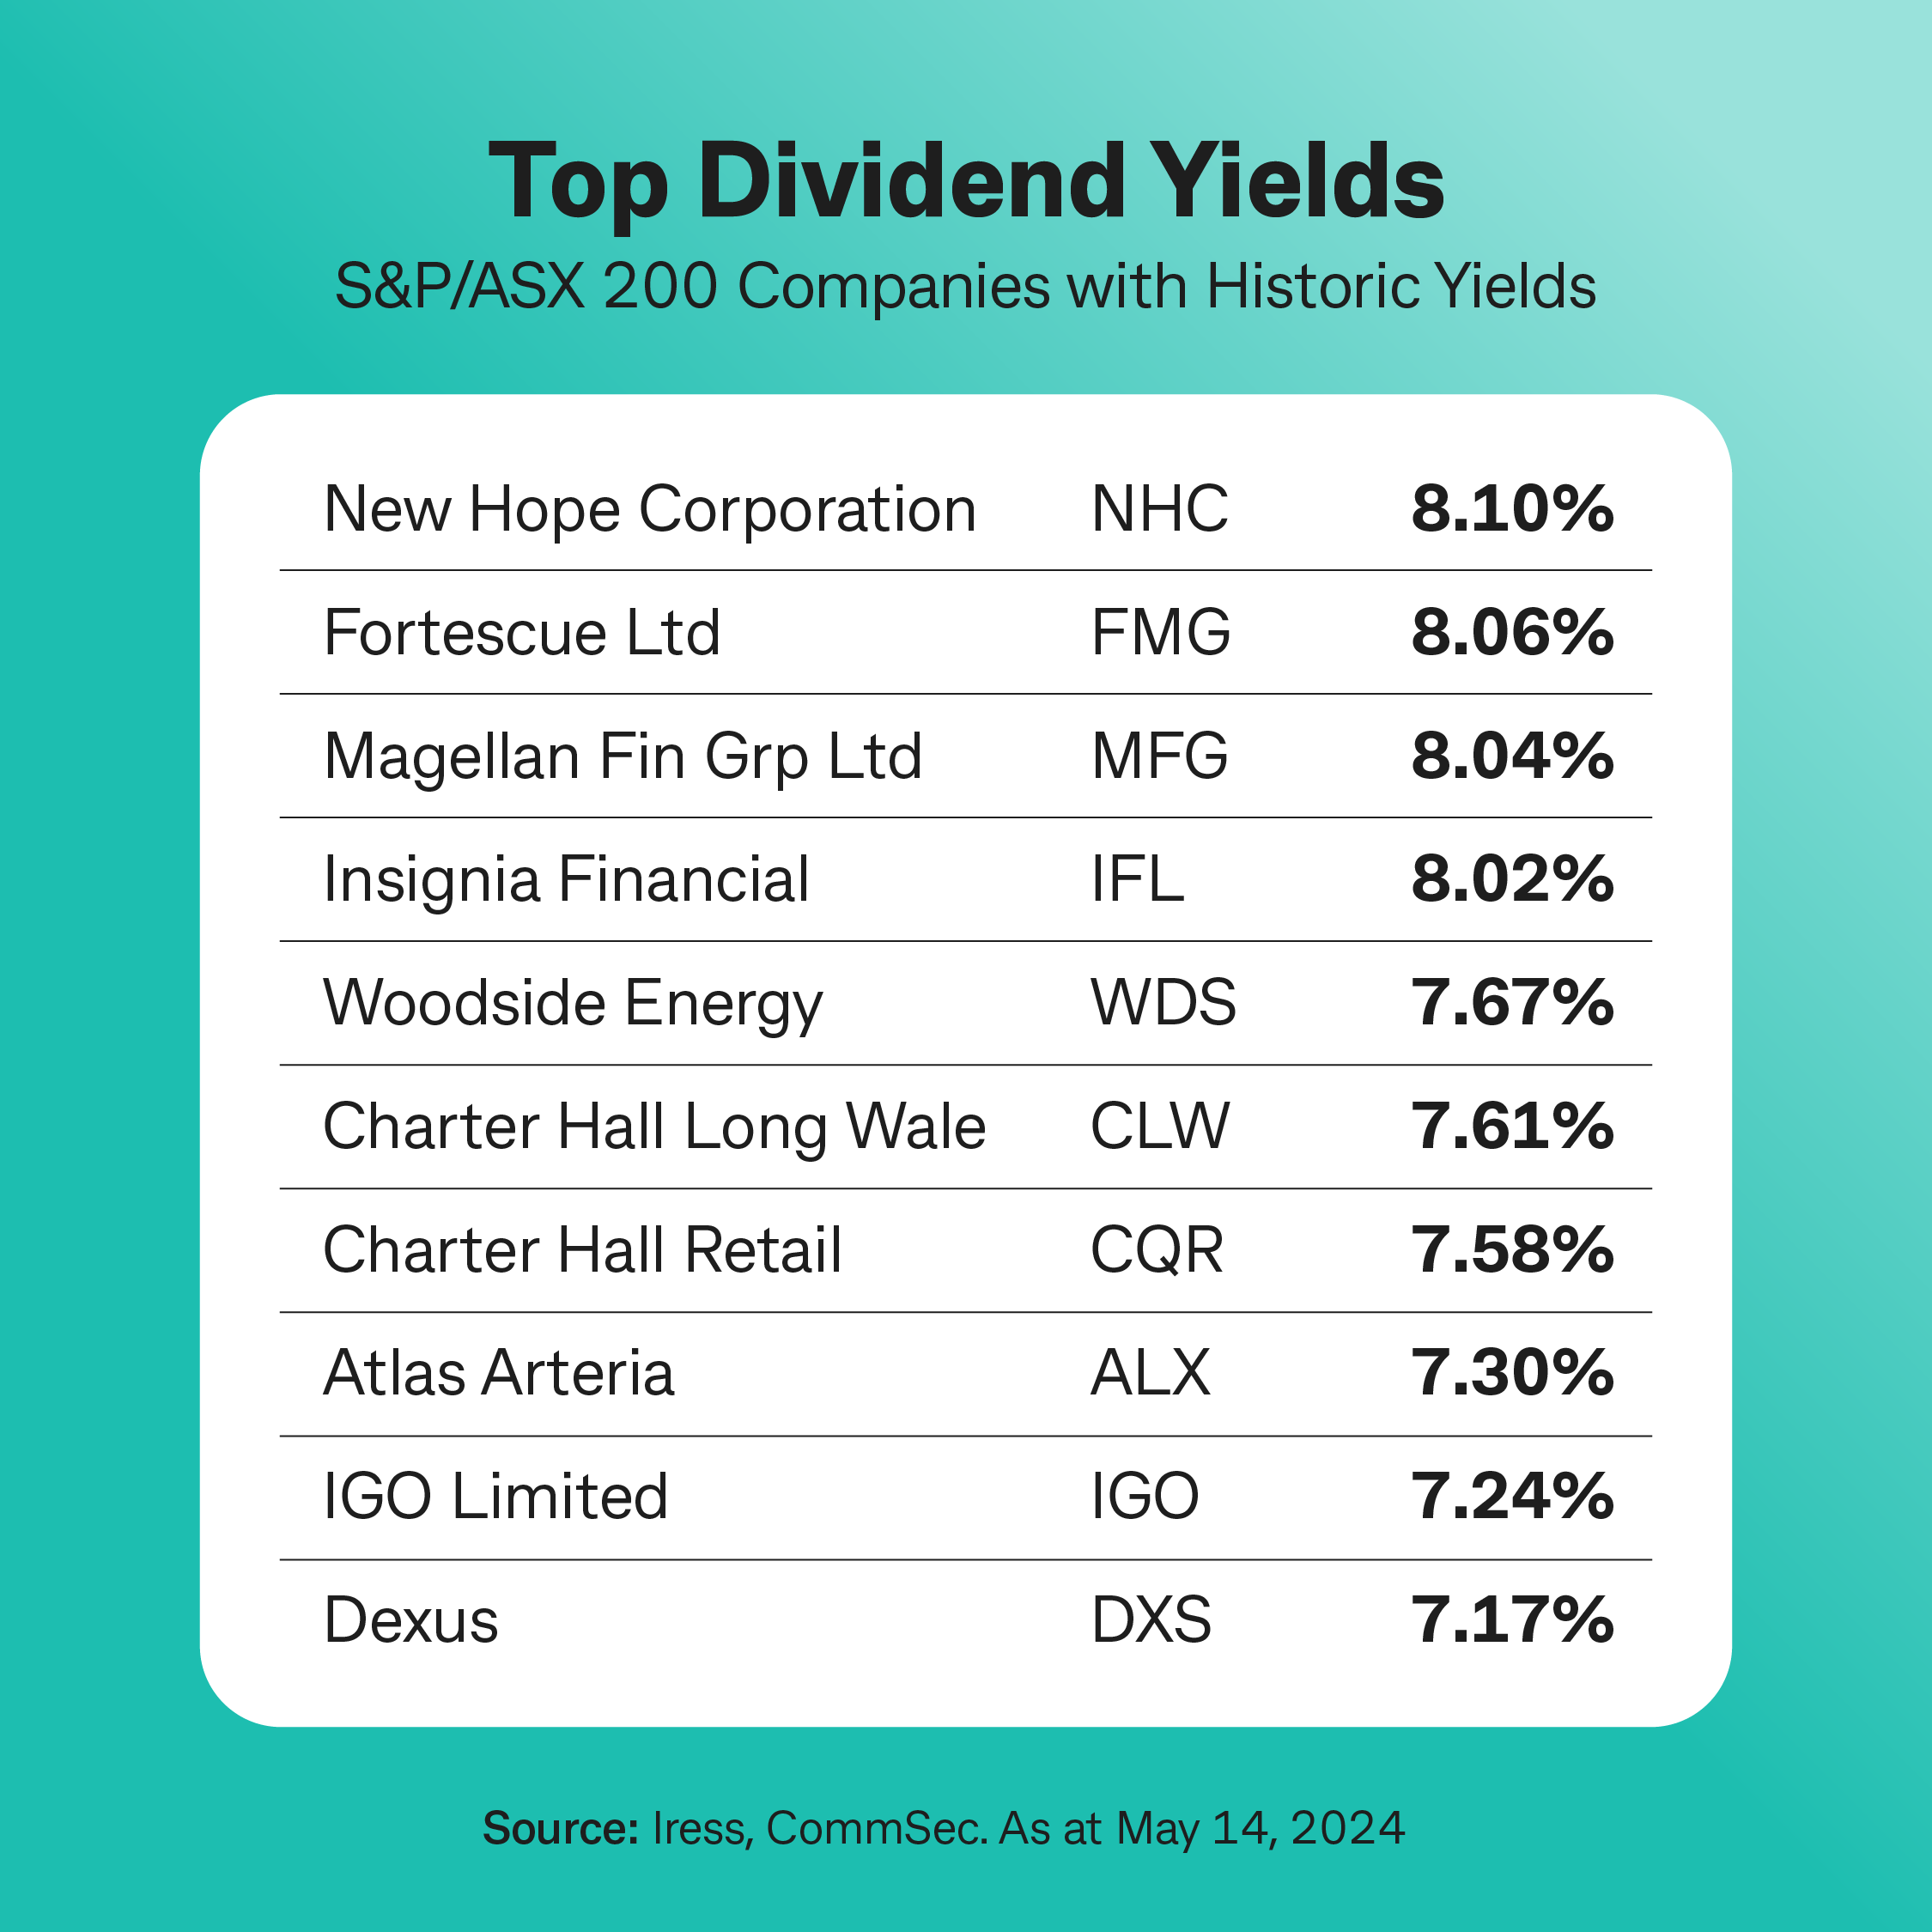 Top dividend yields